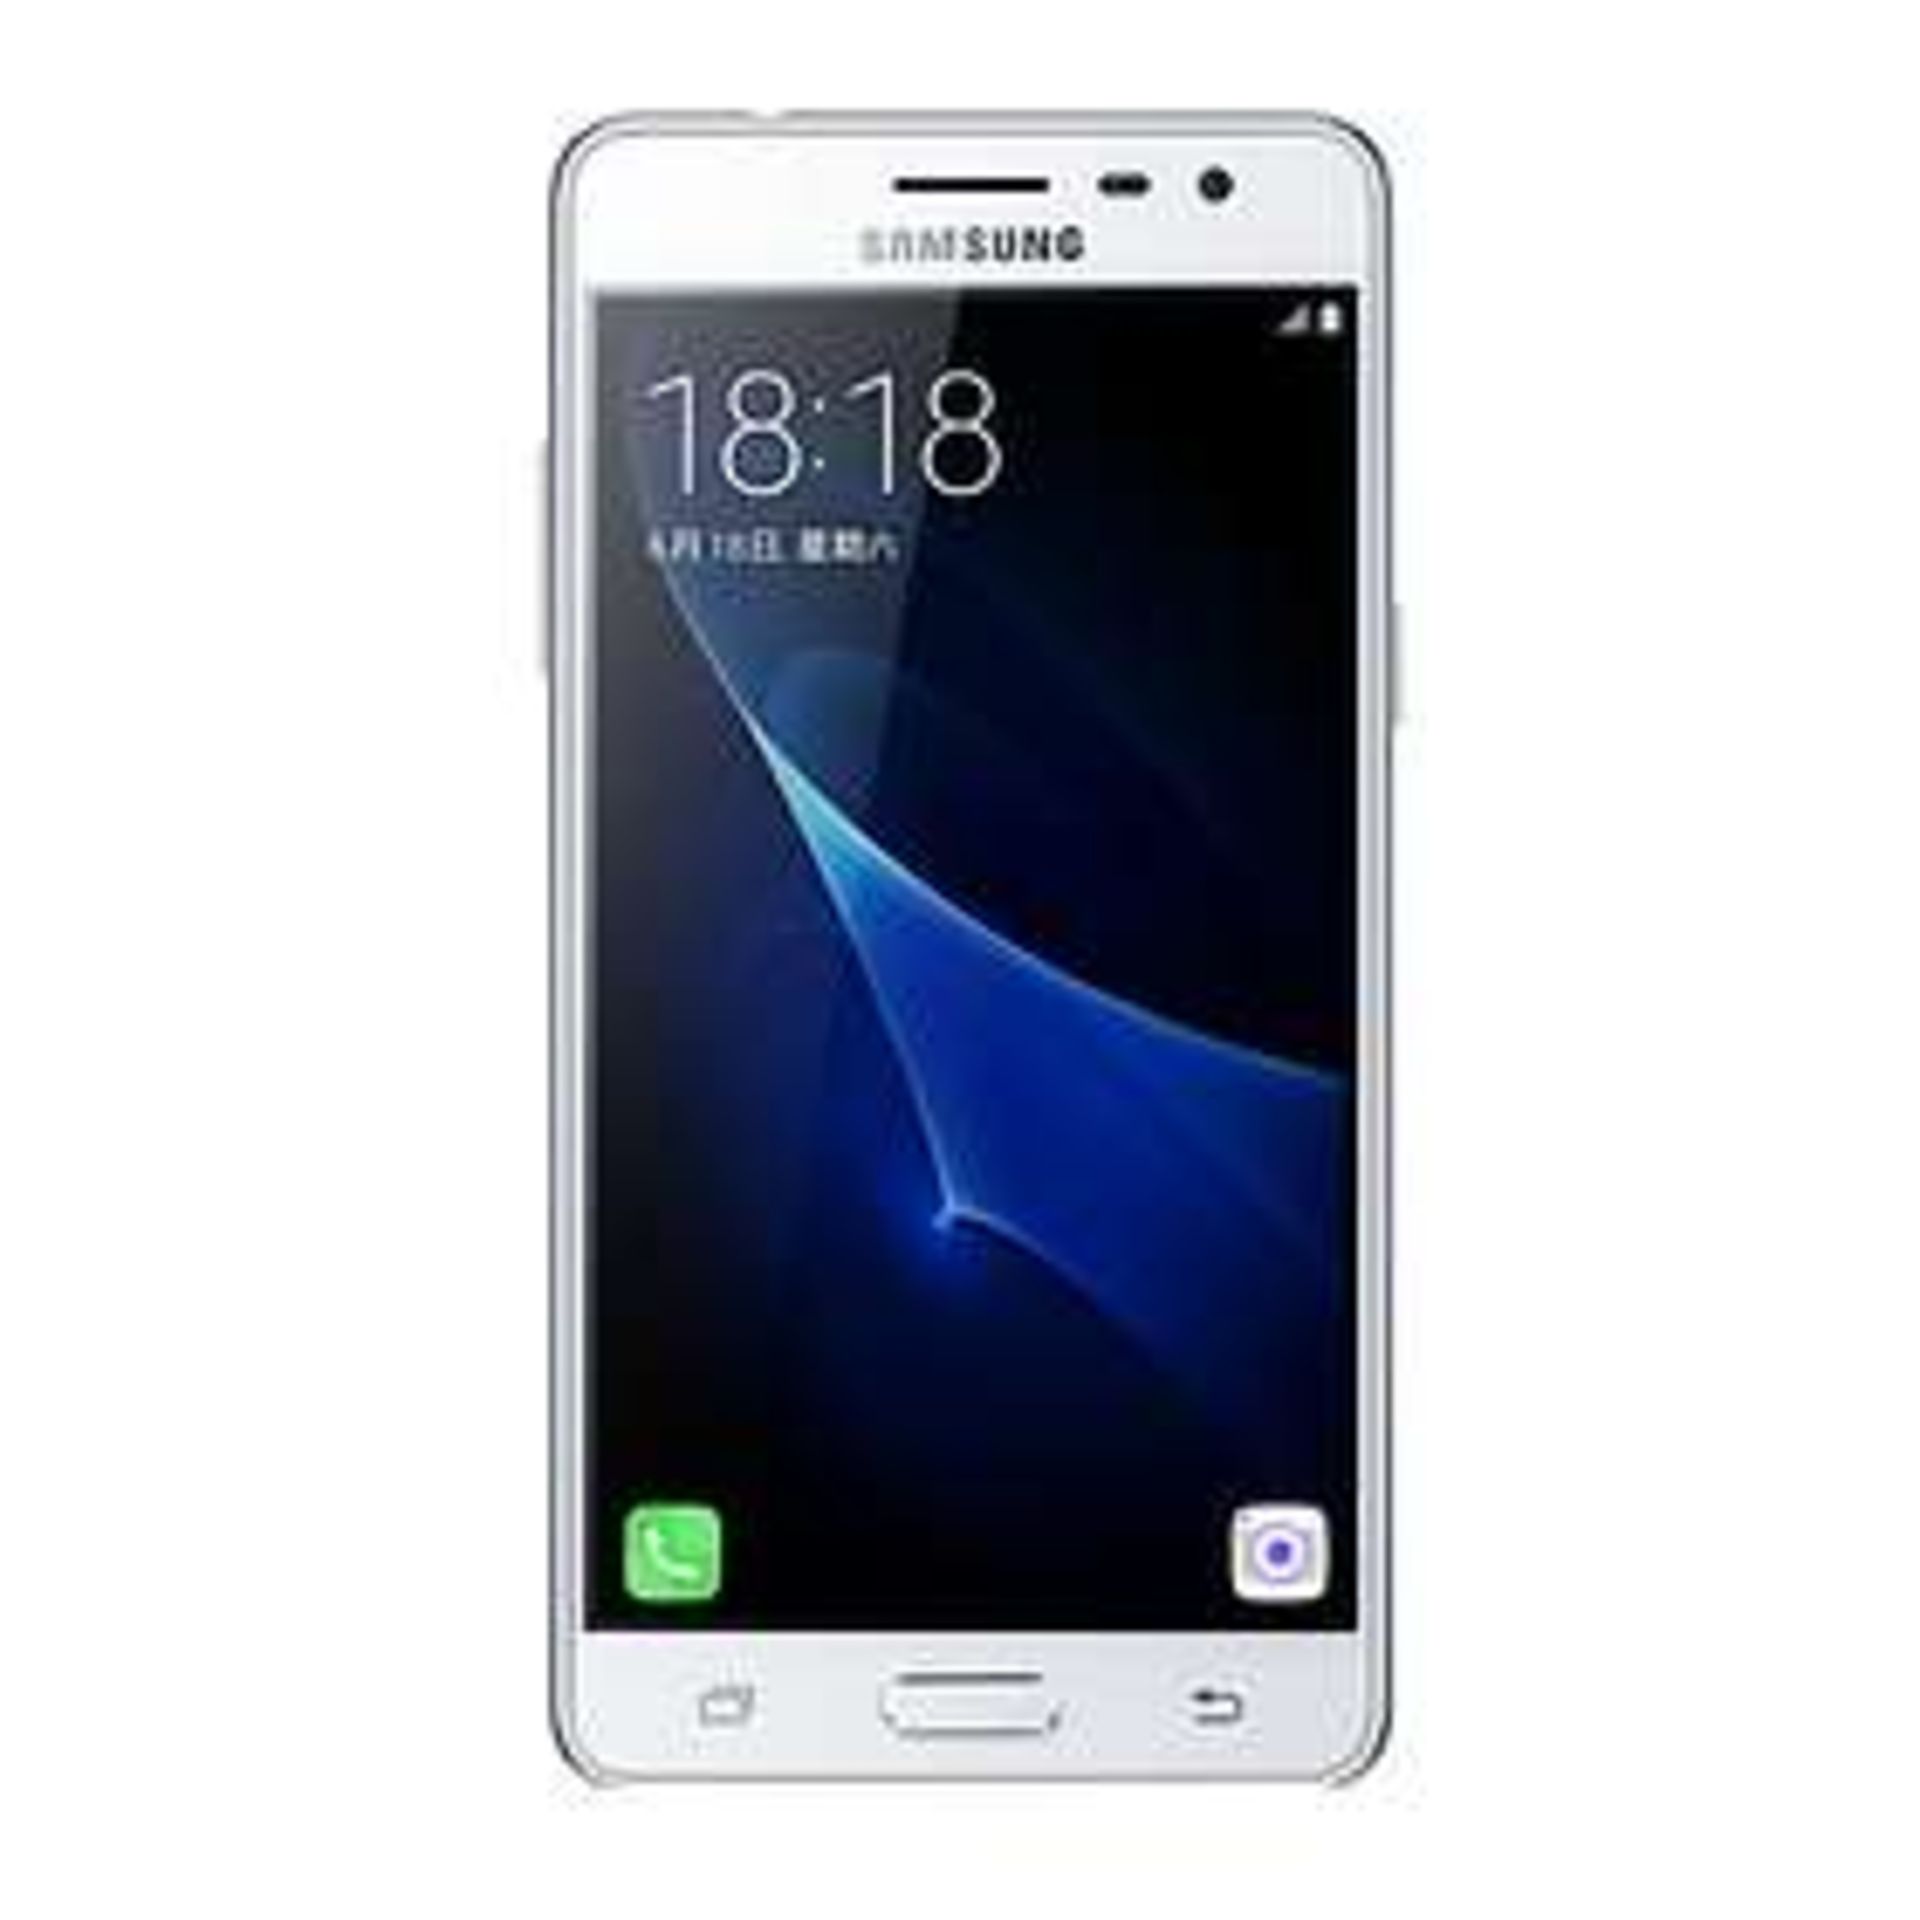 Grade A Samsung J3 Pro(J3110) 2SIM, 4G Colours May Vary Item available approx 12 working days after